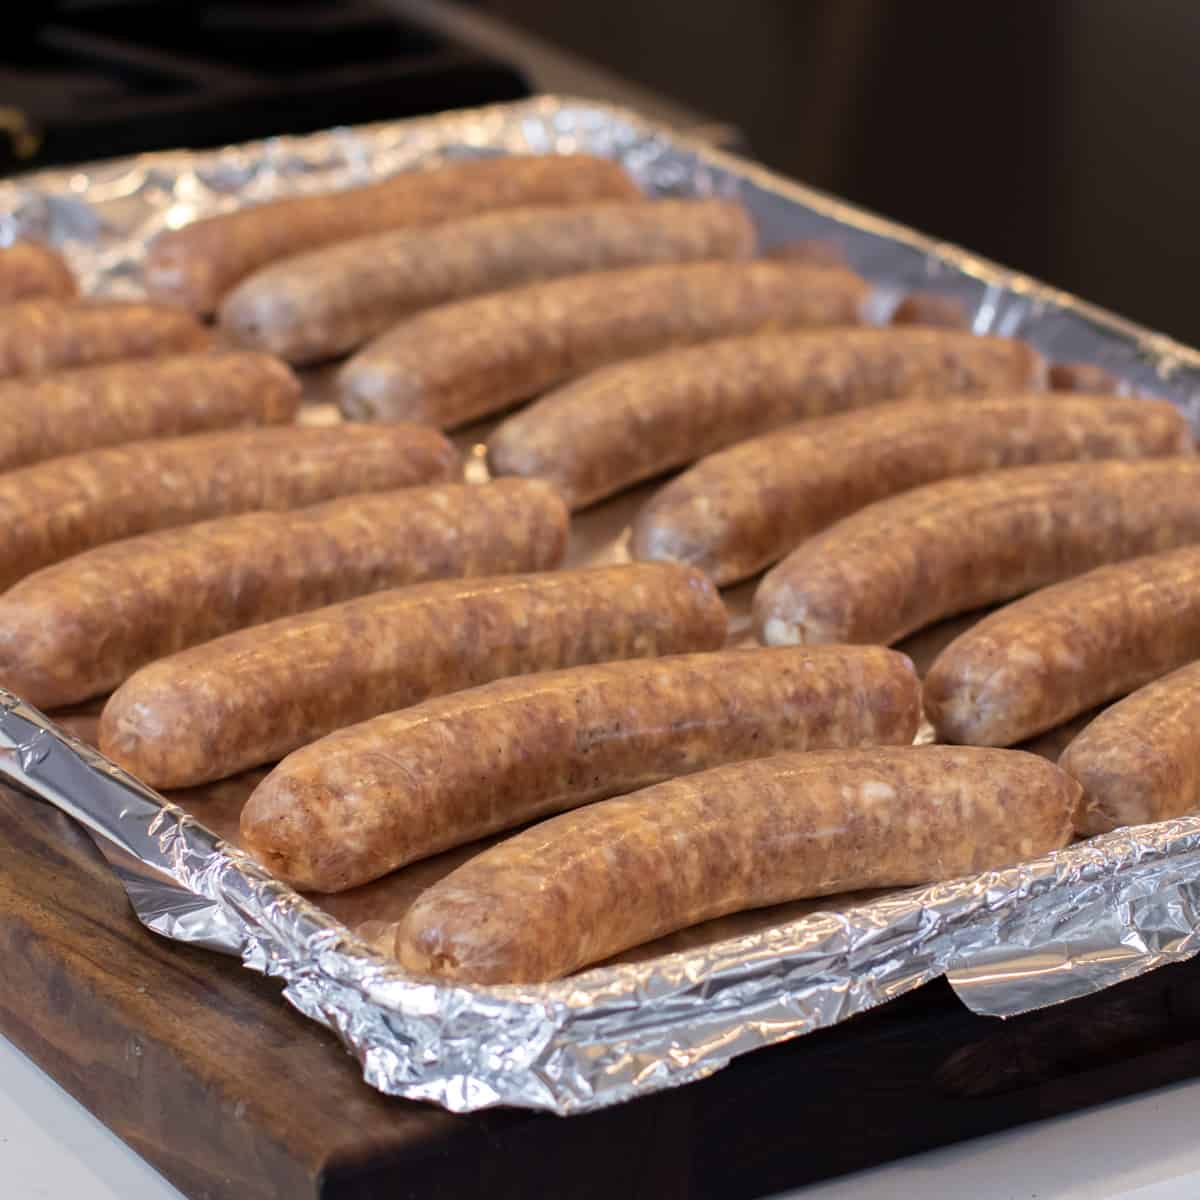 Raw sausages placed on a baking sheet lined with foil.